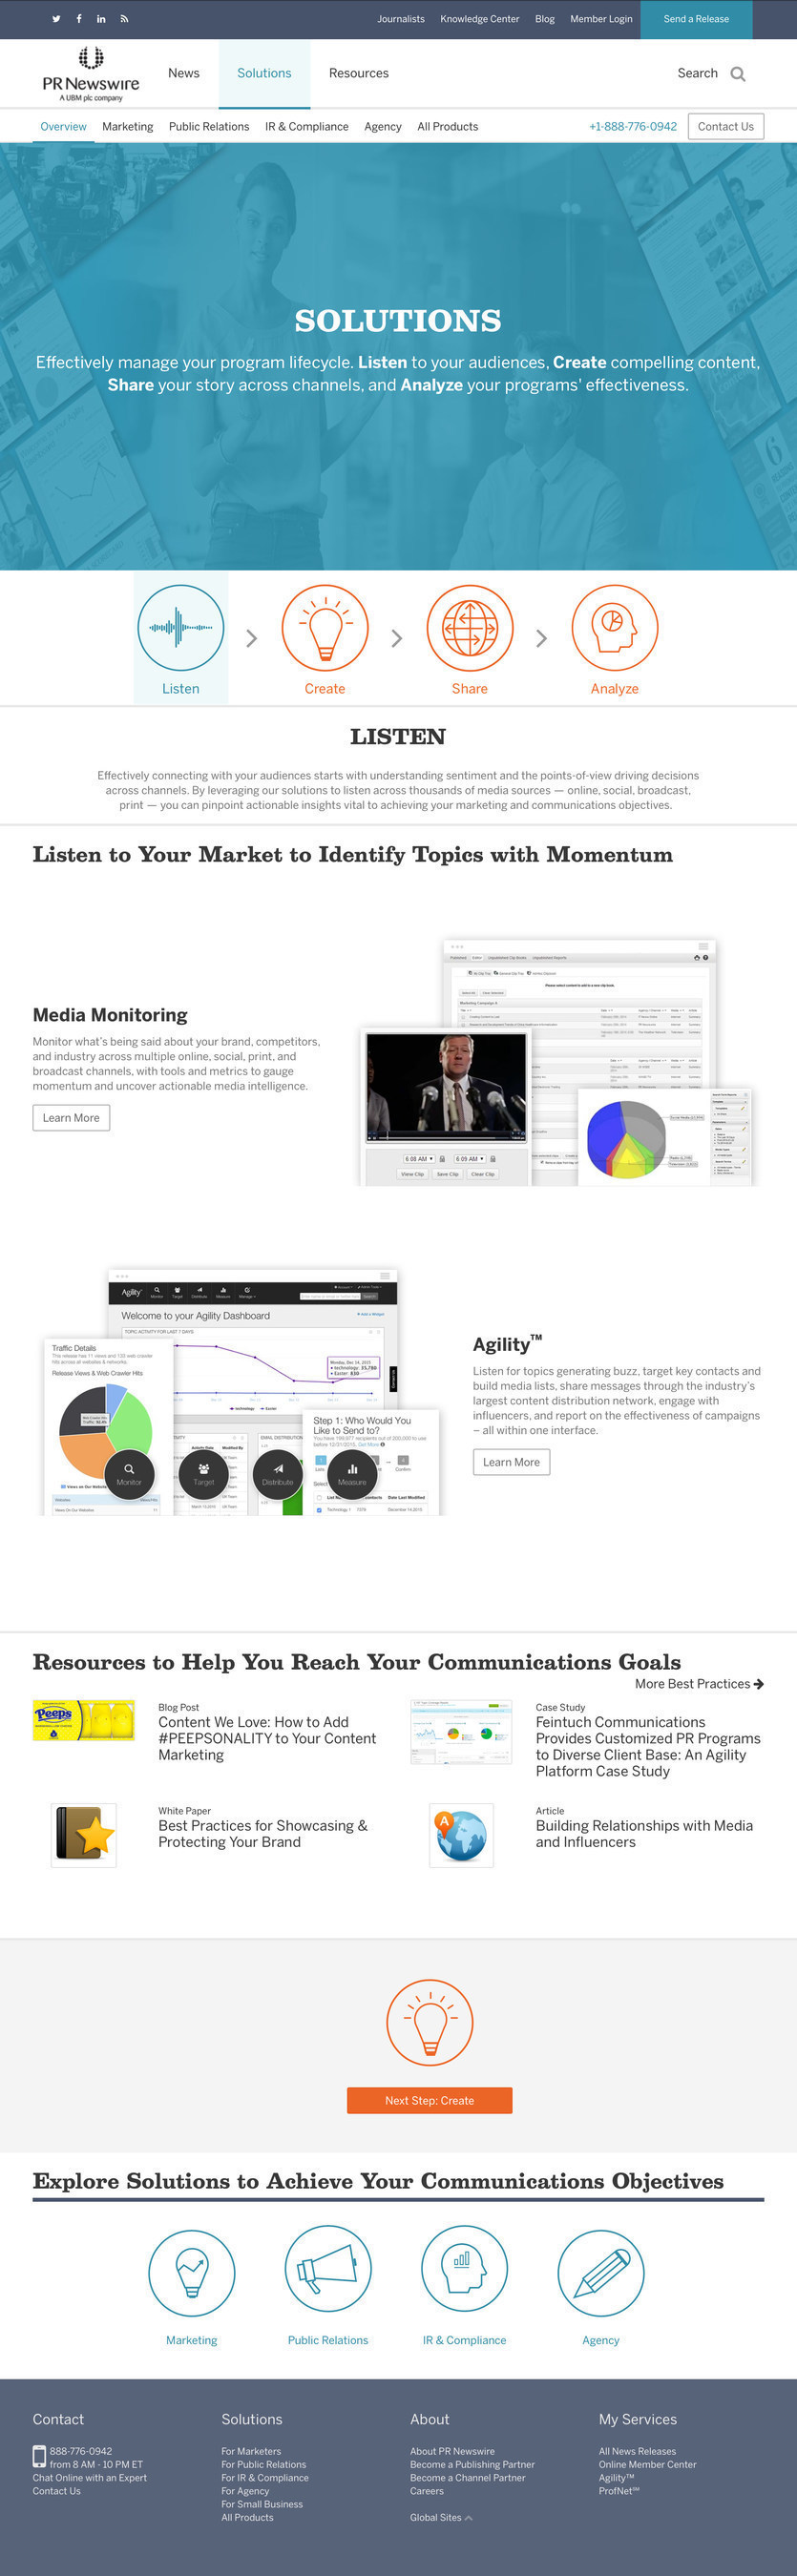 Marketing, PR and IR professionals can explore the Solutions section for options based on their unique goals, accessing PR Newswire's extensive portfolio of solutions organized under four communications objectives: Listen, Create, Share and Analyze.